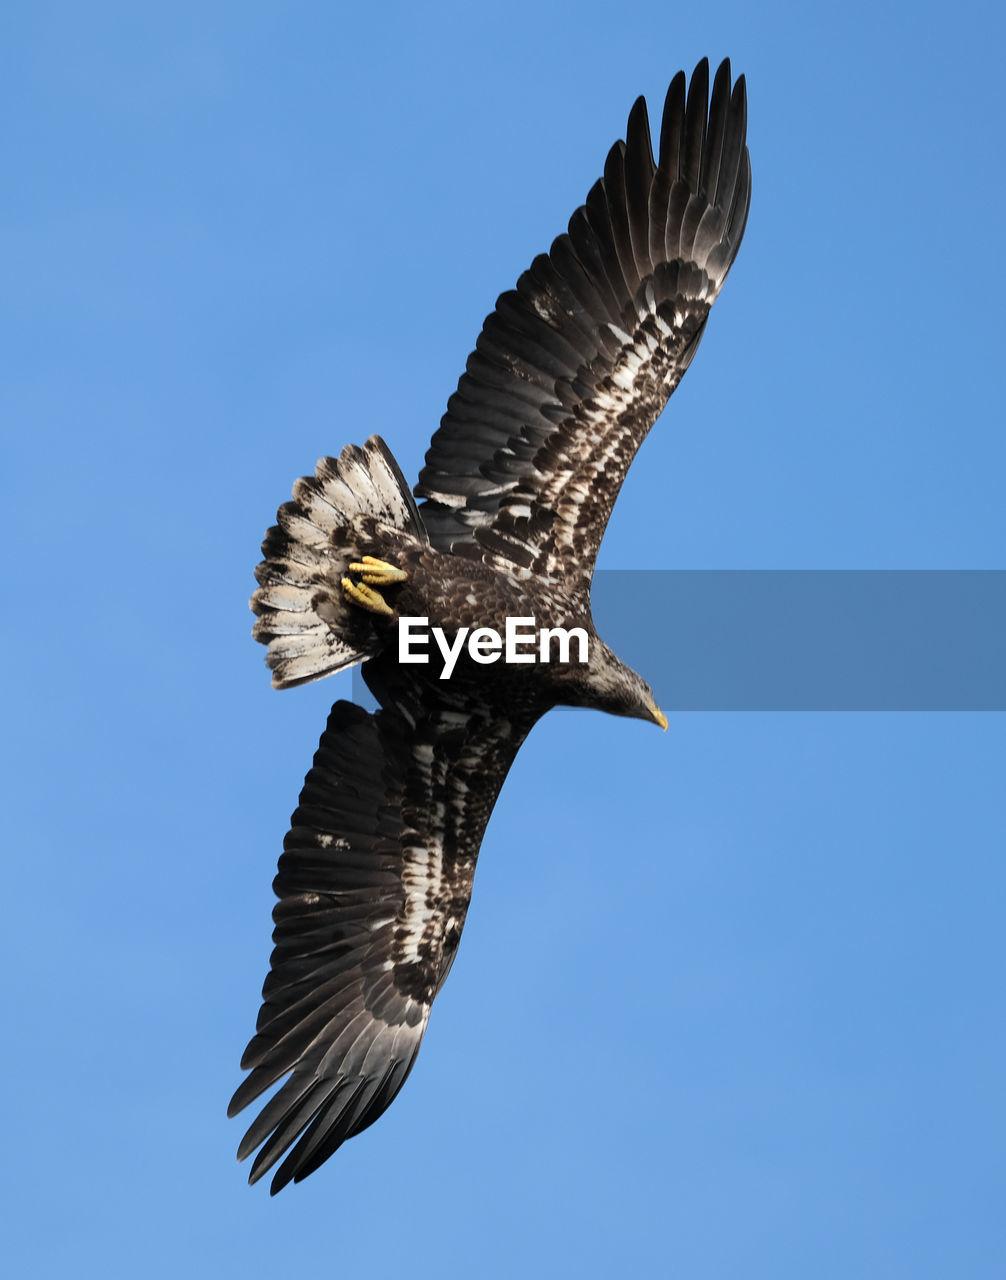 LOW ANGLE VIEW OF EAGLE FLYING AGAINST CLEAR SKY